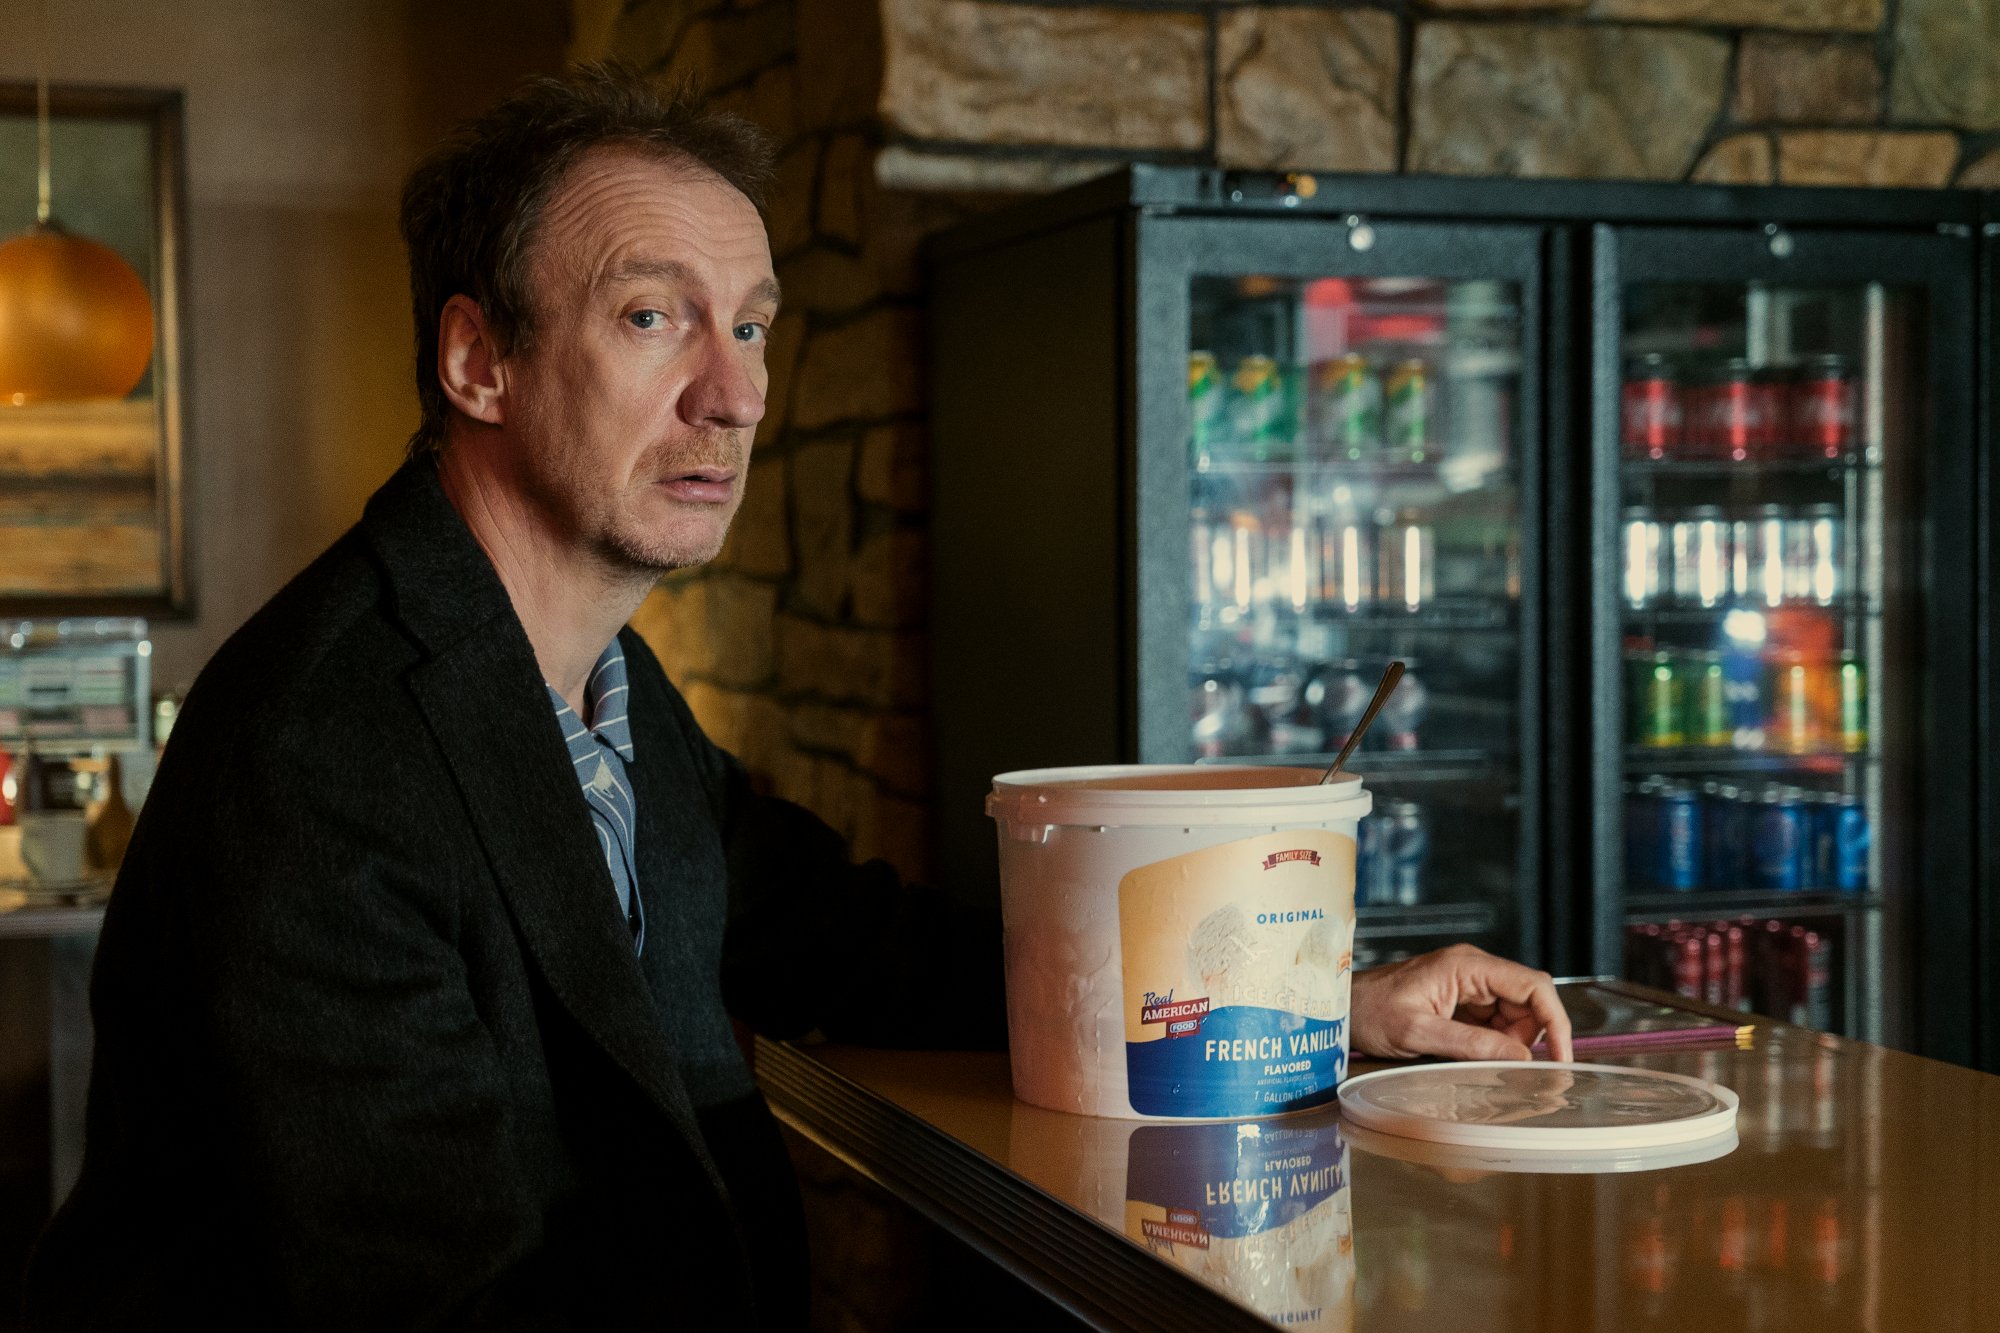 'The Sandman' cast member David Thewlis as Dr. John Dee. He's sitting at a coutner with a tub of ice cream in front of him.